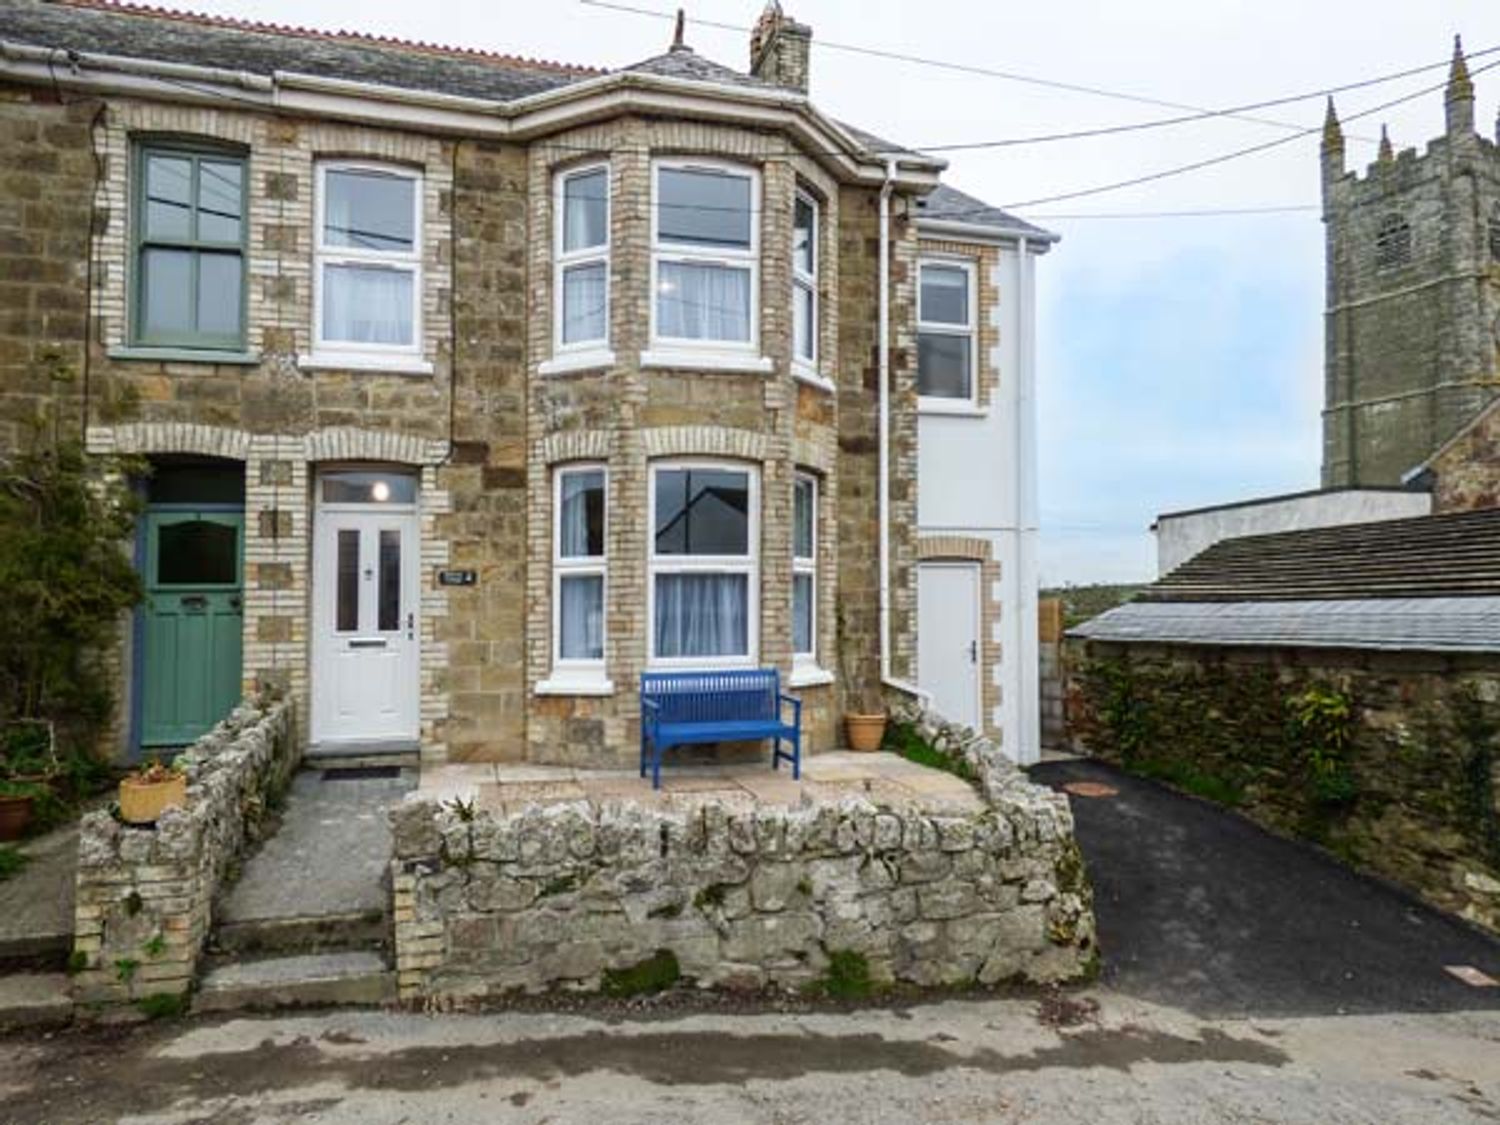 Hillview Cottage - Cornwall - 920555 - photo 1